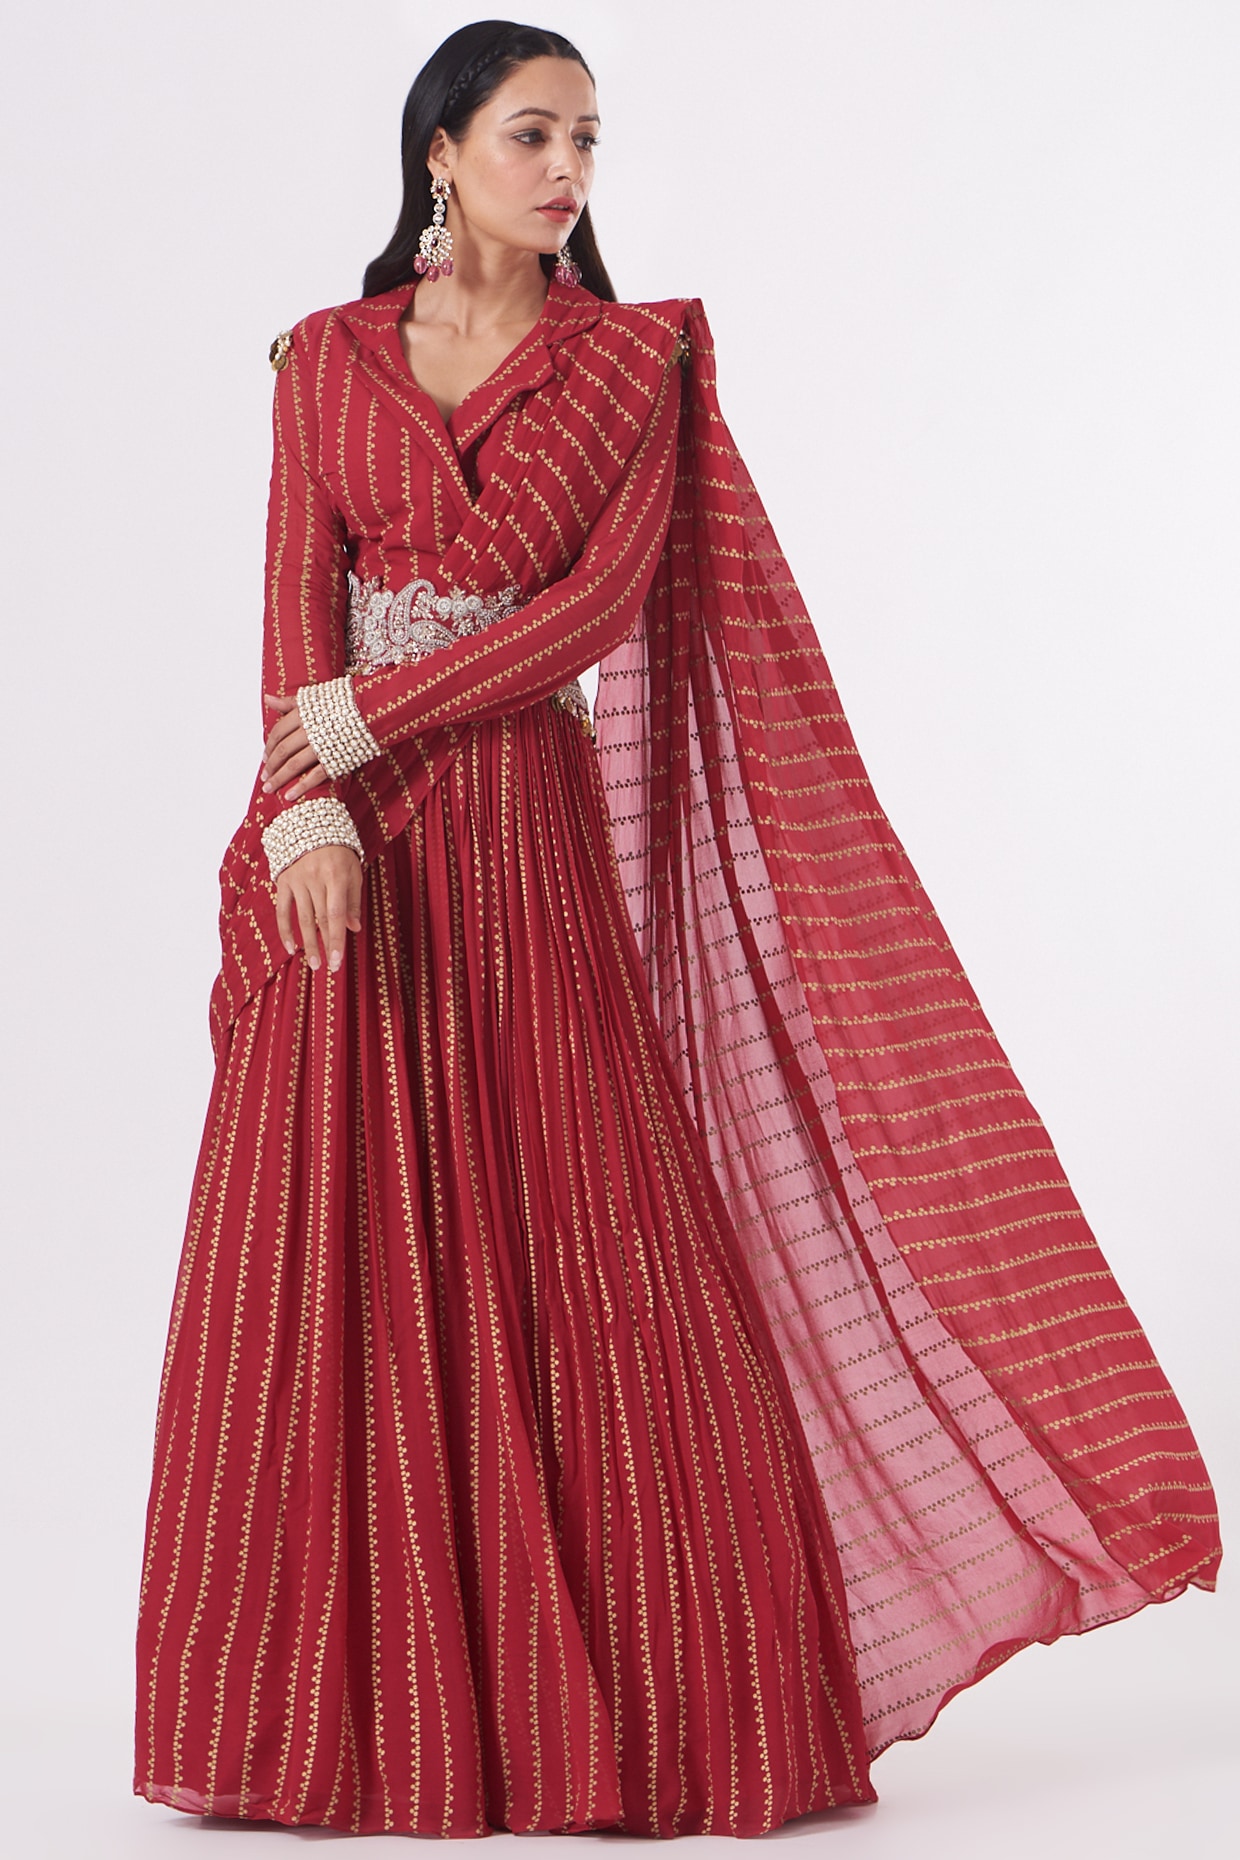 Amazon.in: Plazo Sarees For Women Party Wear